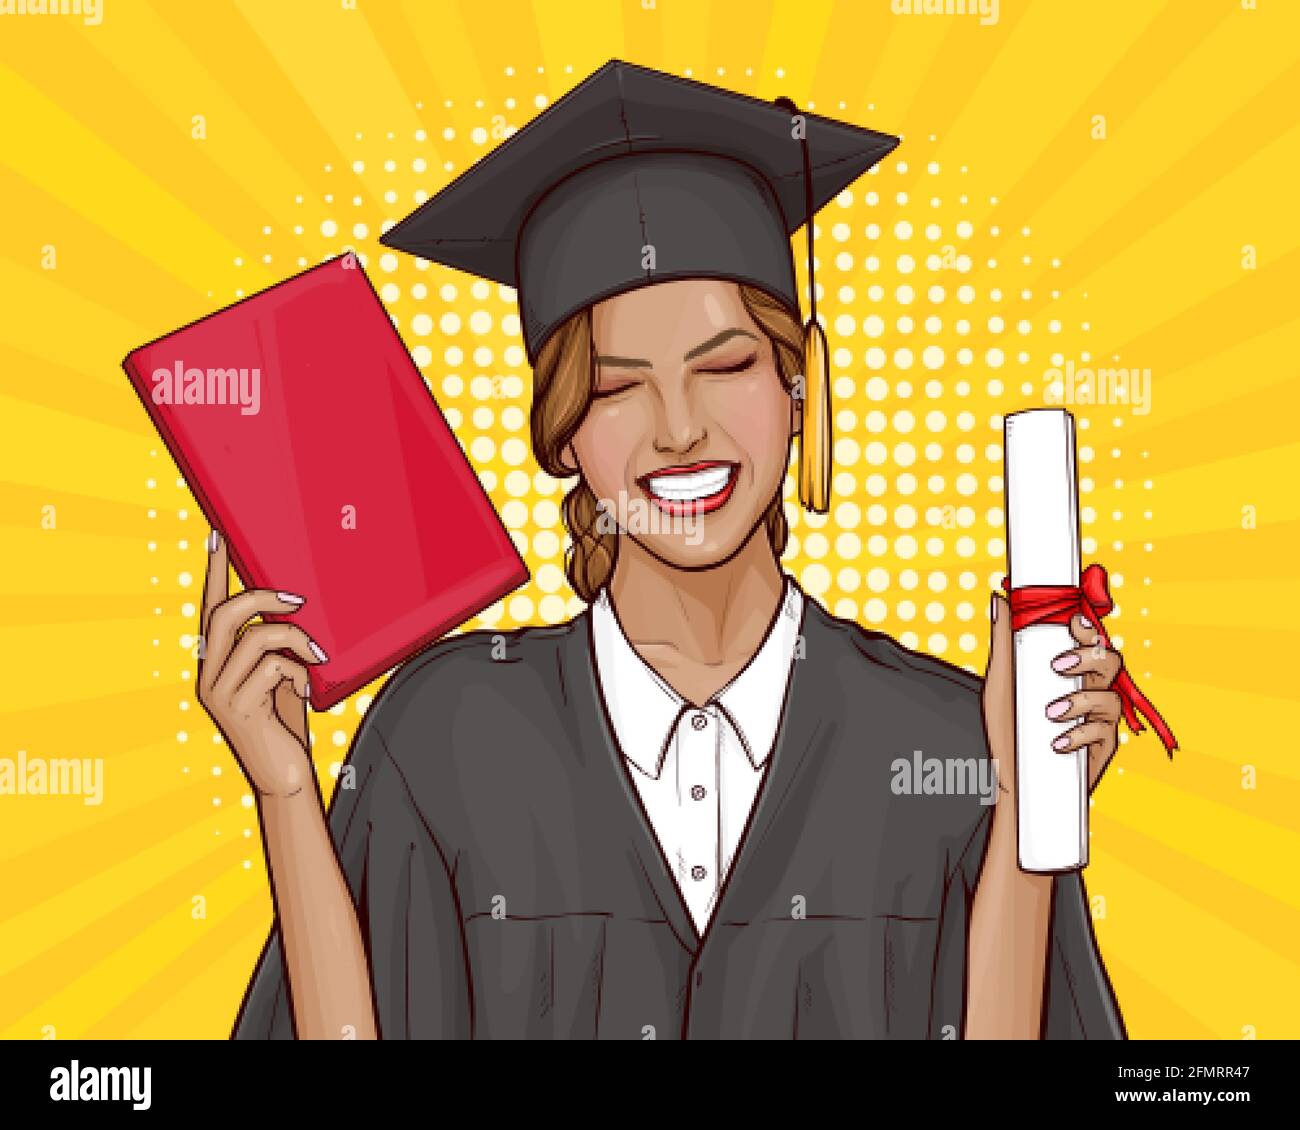 Happy young girl graduate student in mantle and graduation cap holding university diploma in her hand. Concept of celebrating the graduation ceremony. Vector pop art illustration on yellow background. Stock Vector